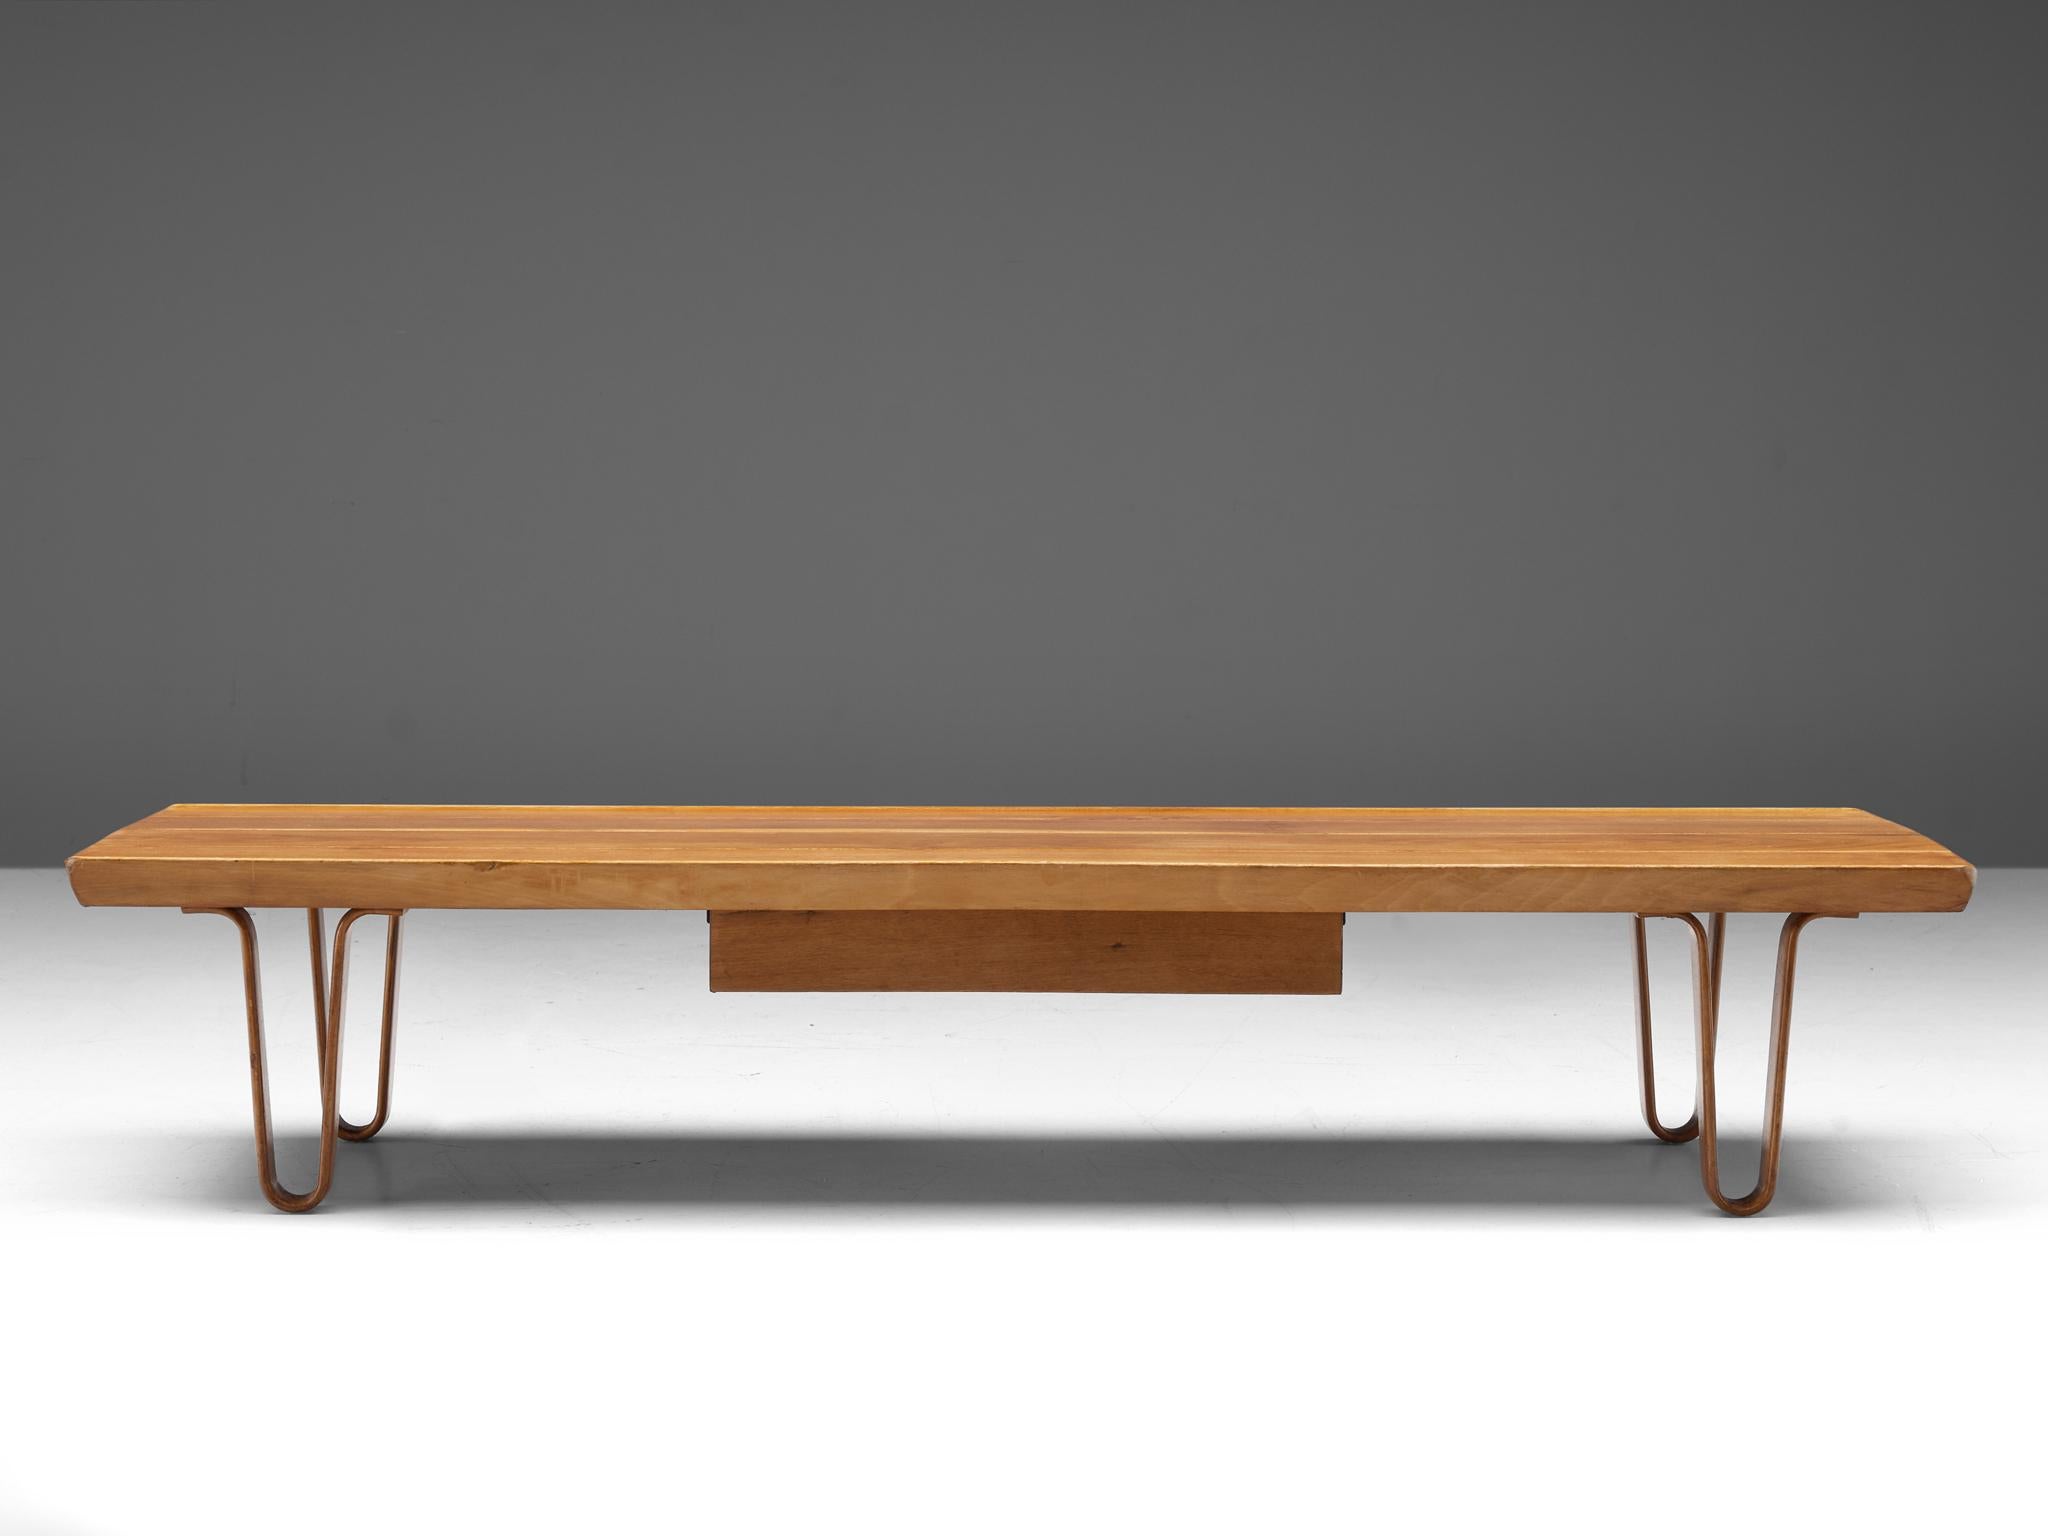 Edward Wormley, 'Long John' coffee table model 4699, mahogany, United States, 1962.

The 'Long John' coffee table is a design of Edward Wormley for Dunbar, features beautiful lines, balanced in an almost Japanese aesthetics. Dunbar mentions 